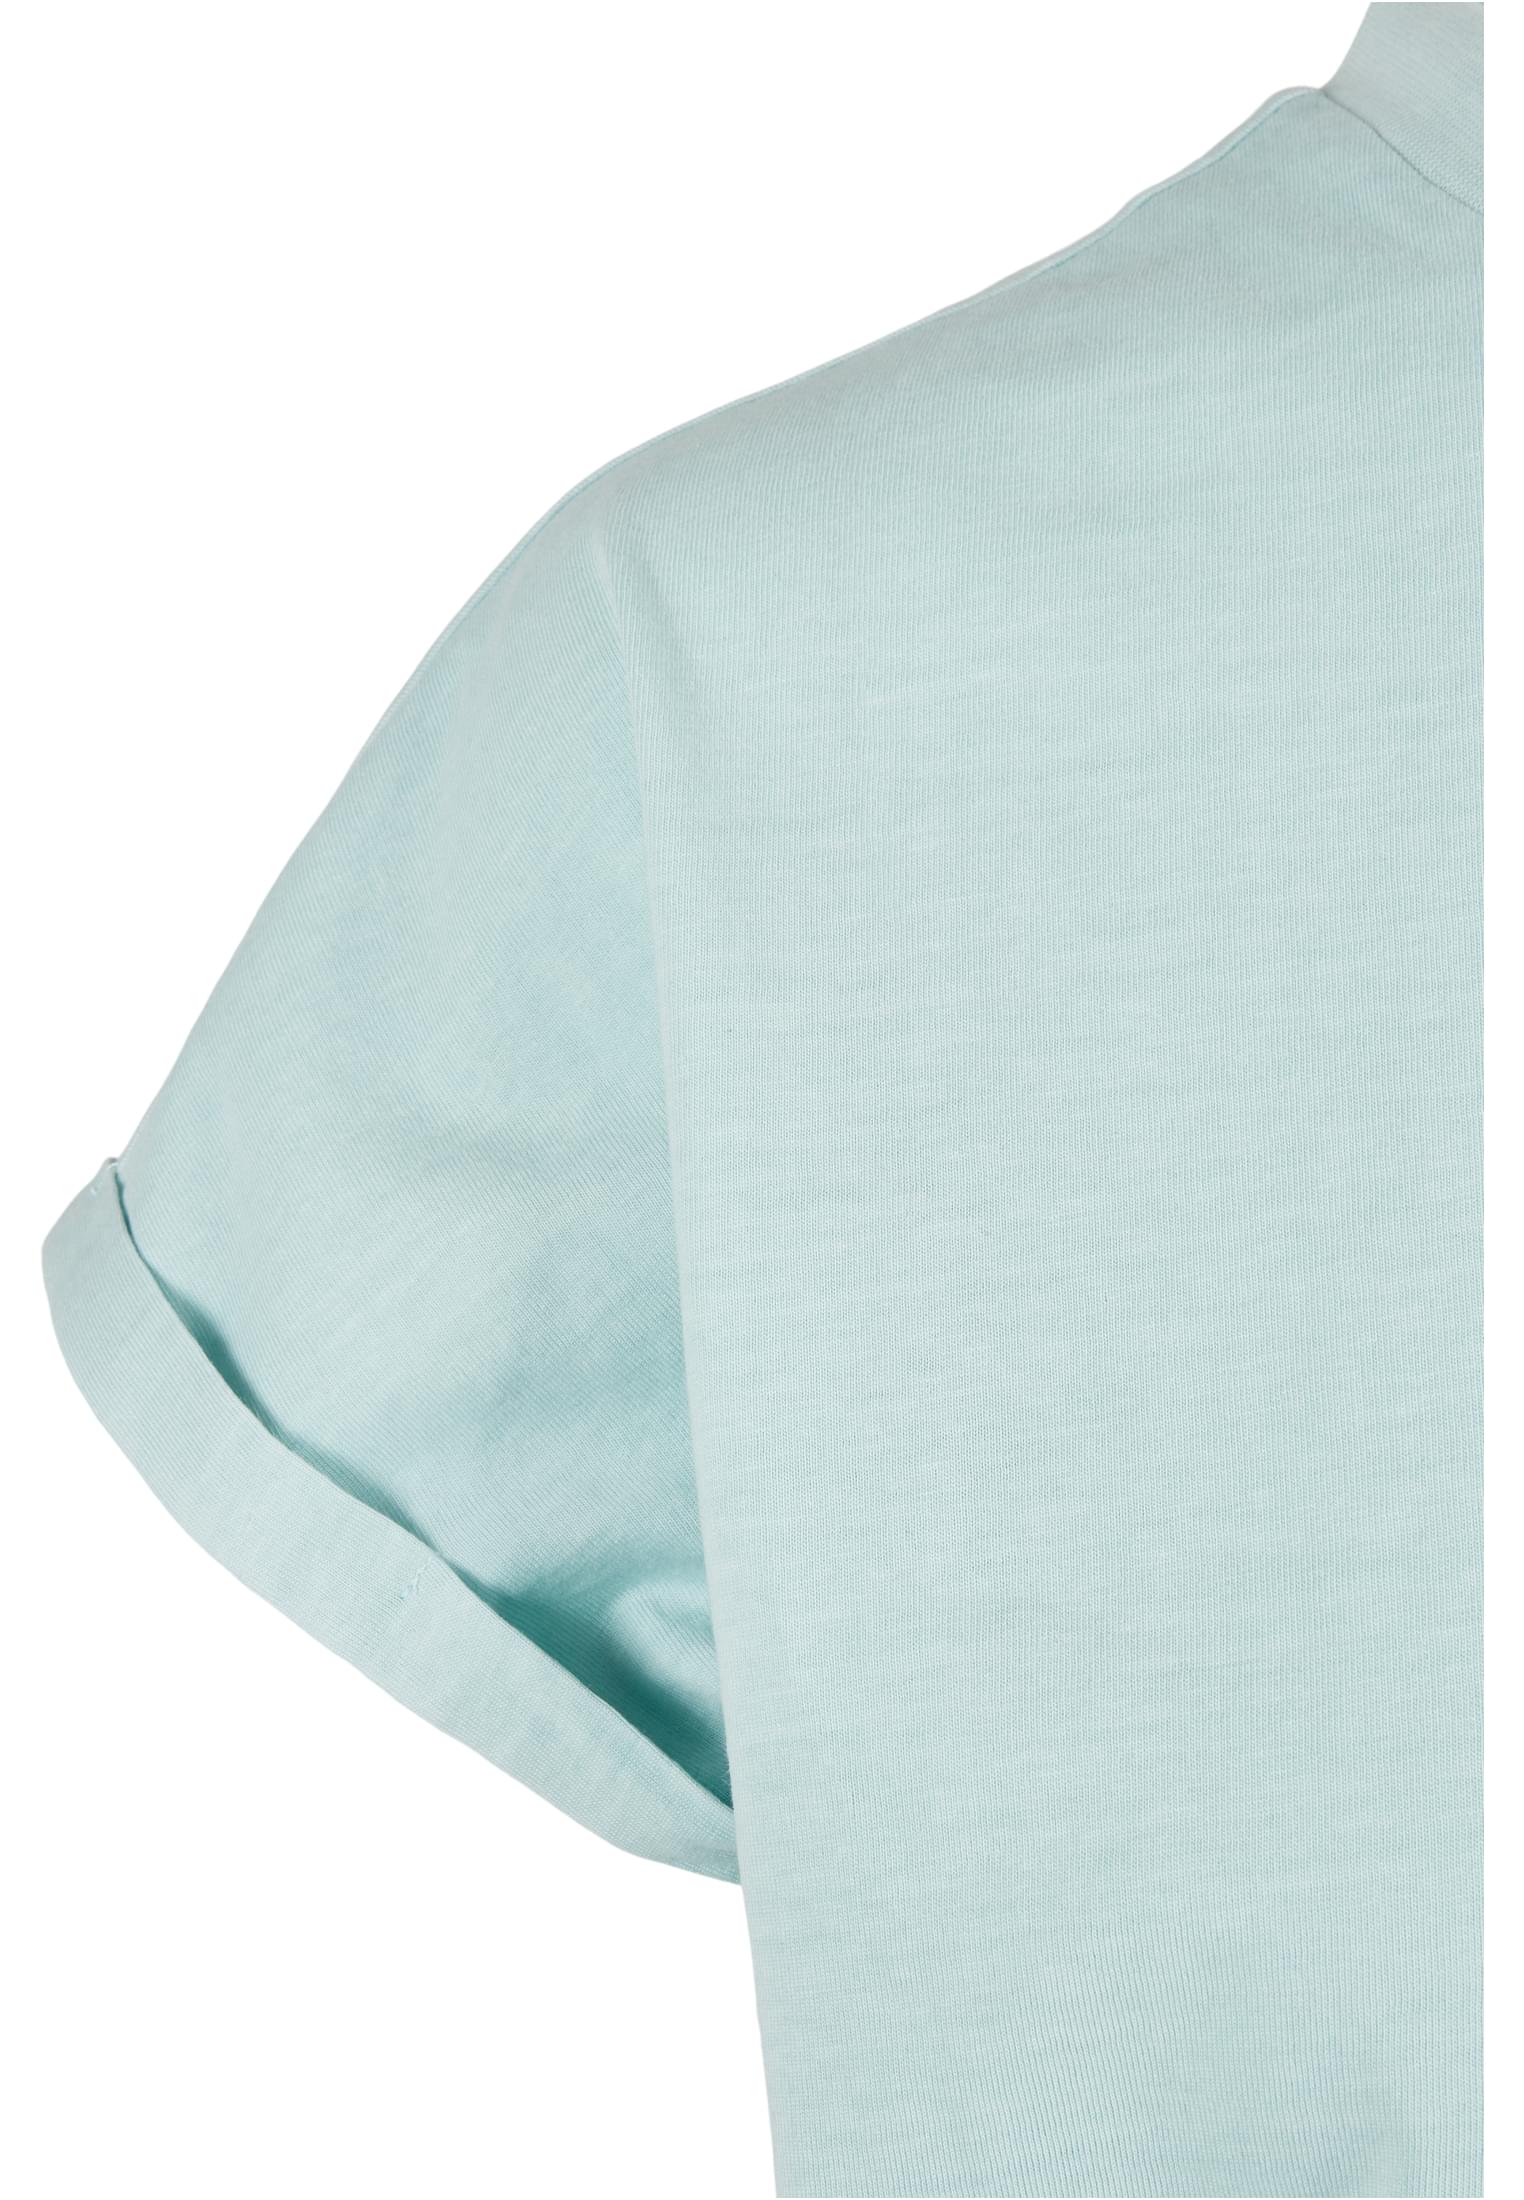 T-Shirts Ladies Short Pigment Dye Cut On Sleeve Tee in Farbe seablue